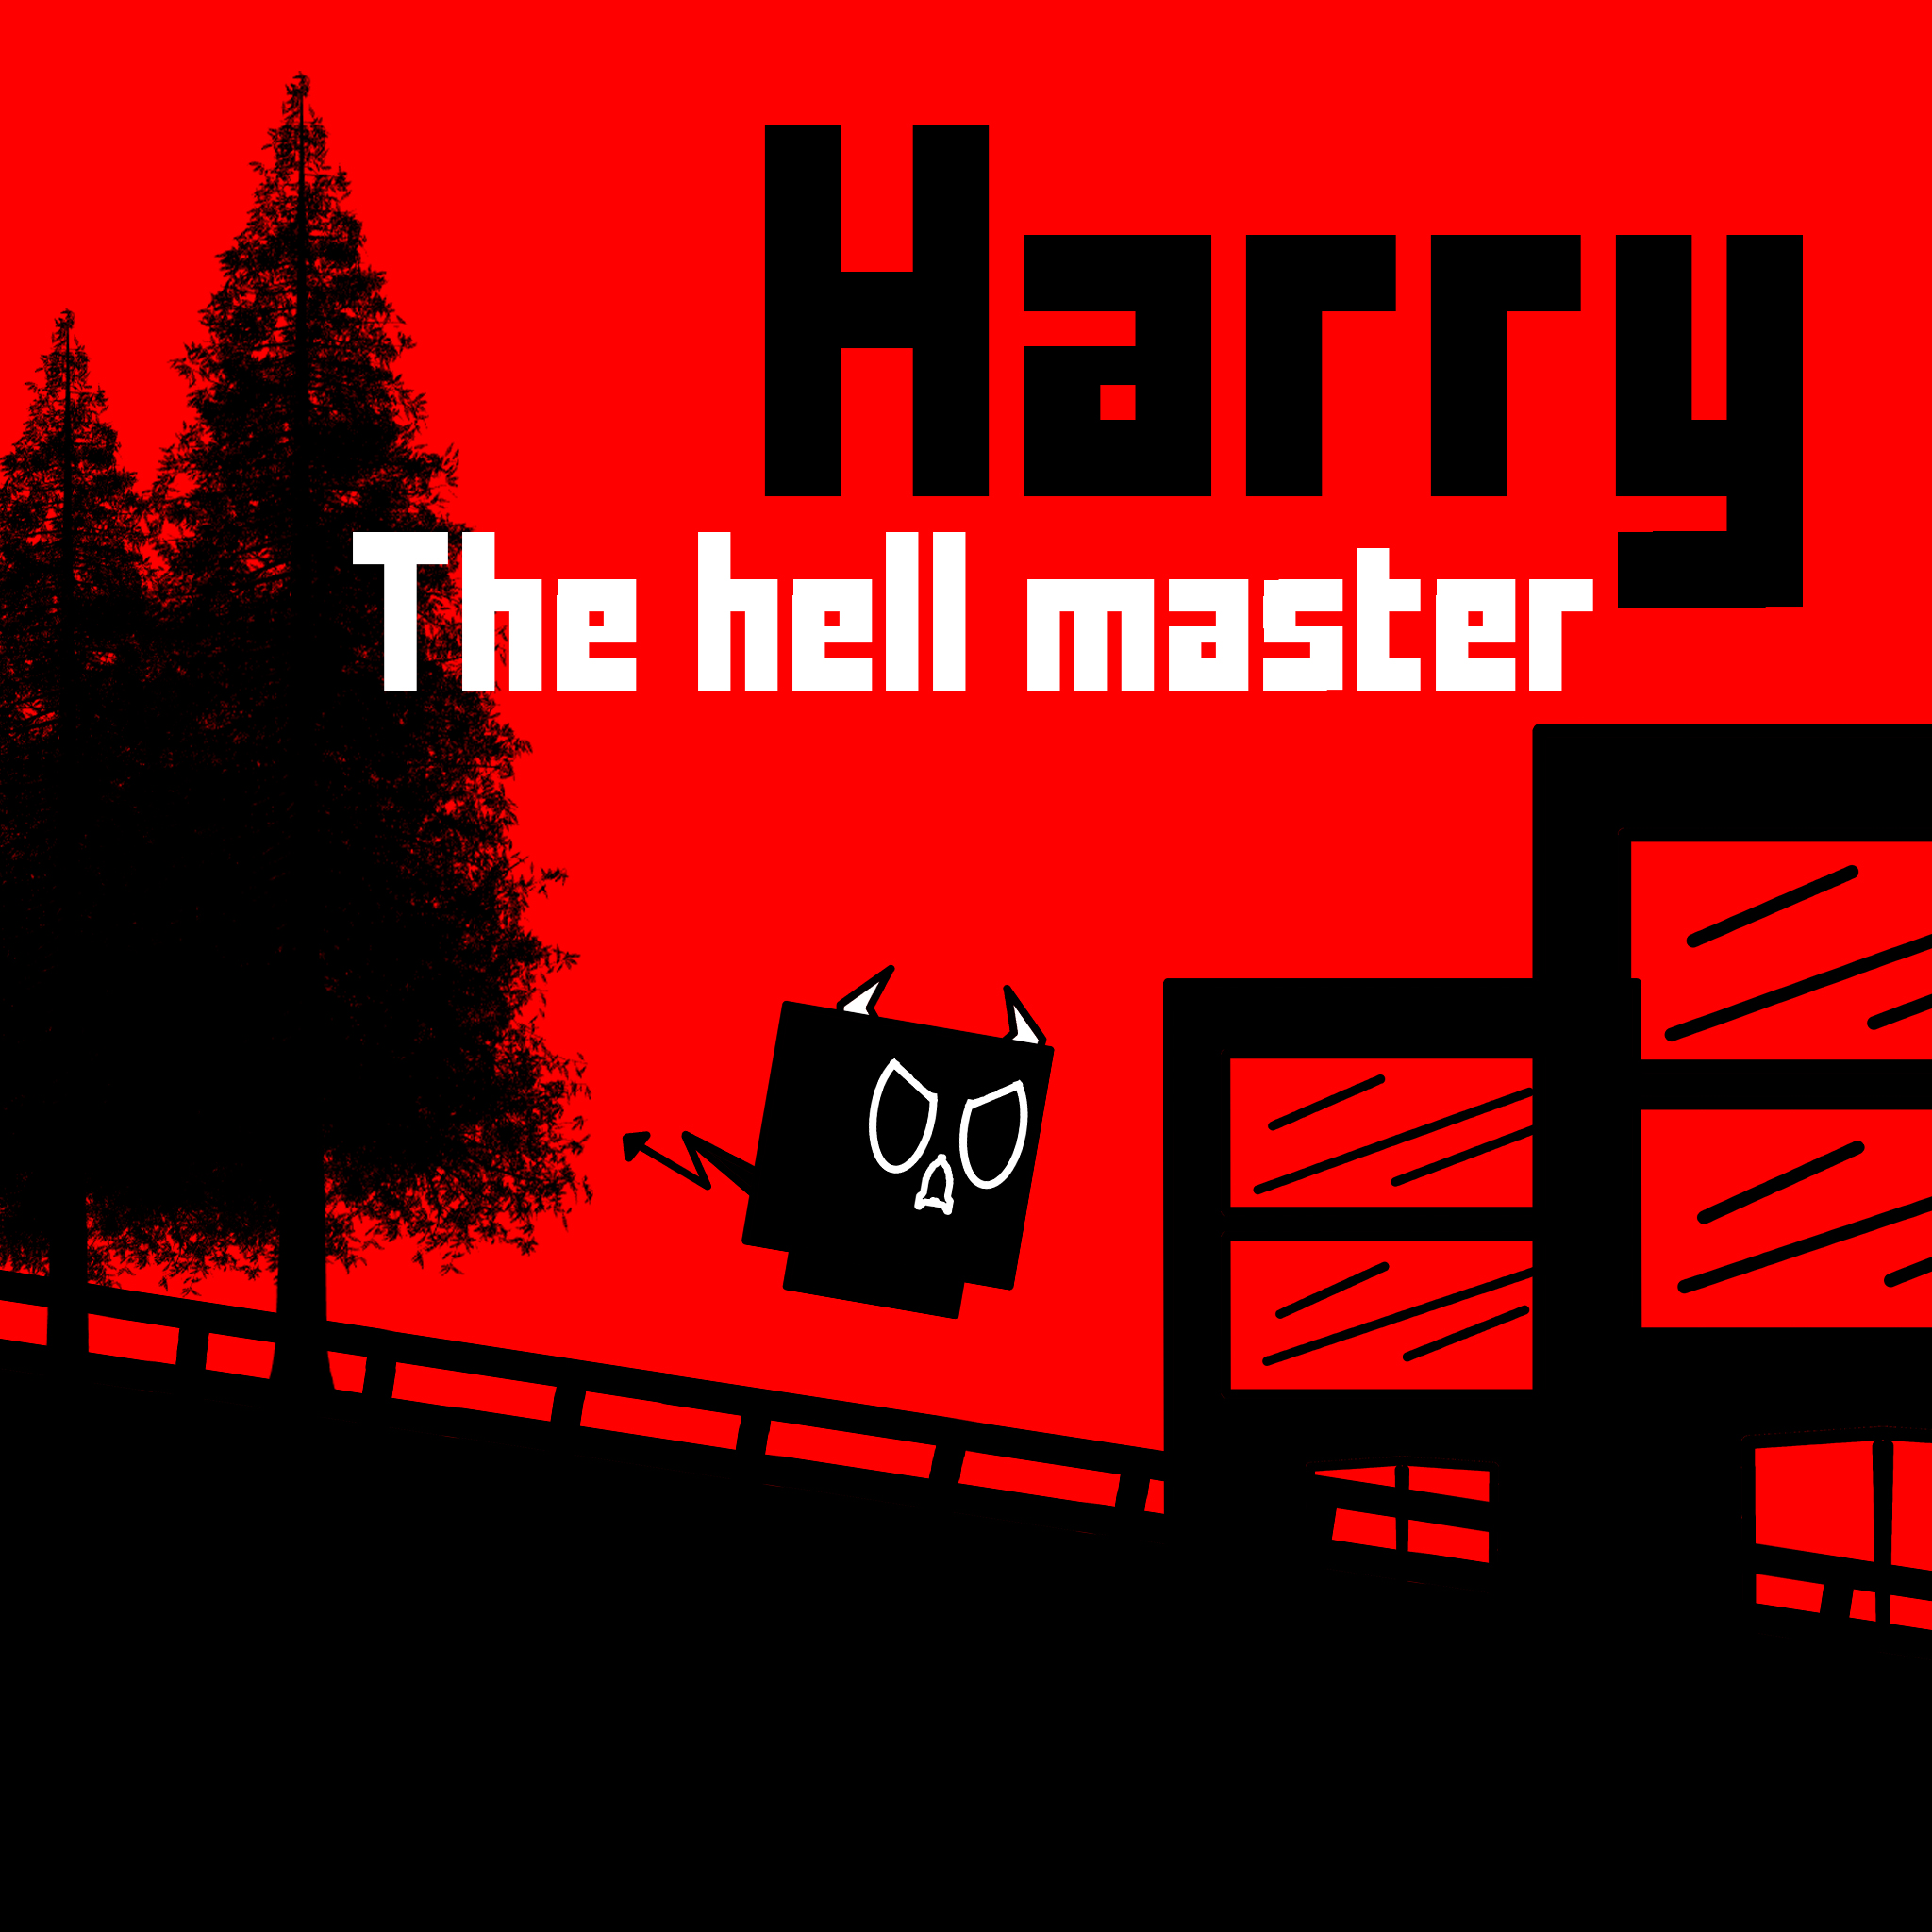 Harry, The hell master.